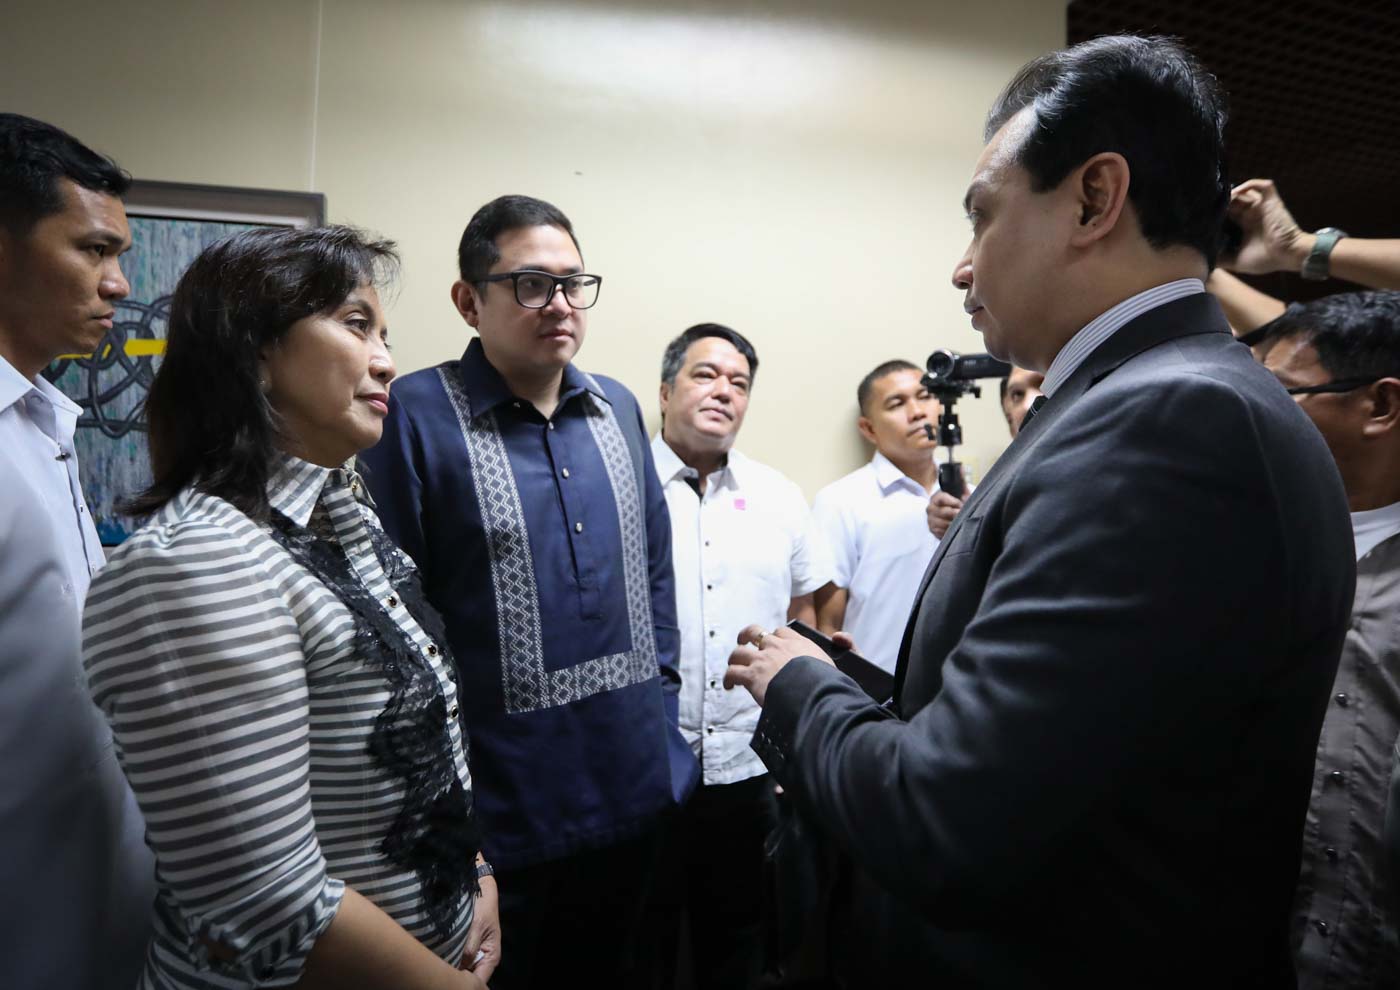 2022. Vice President Leni Robredo is the opposition's solid choice for president, says former senator Antonio Trillanes IV. File photo by OVP  